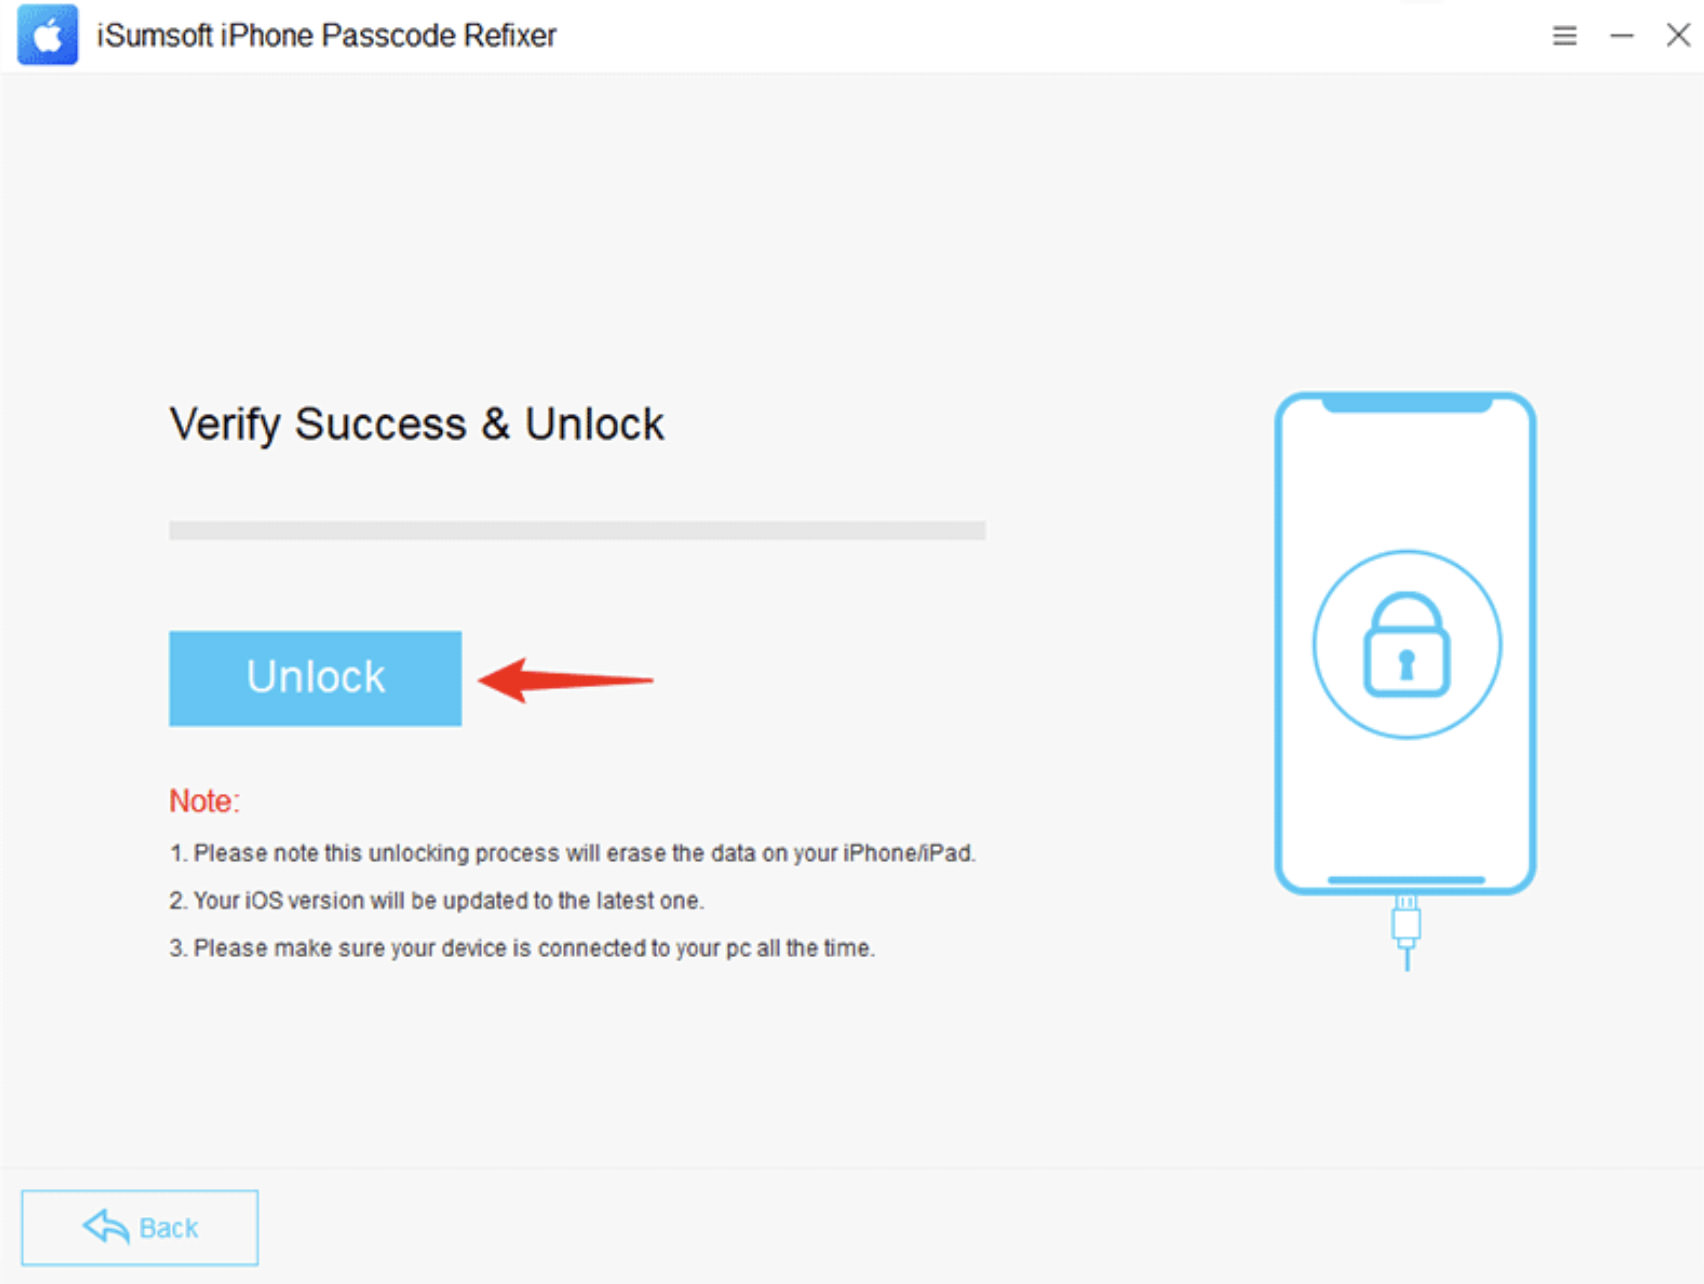 Screen showing 'Unlock' button highlighted, indicating start of unlocking process